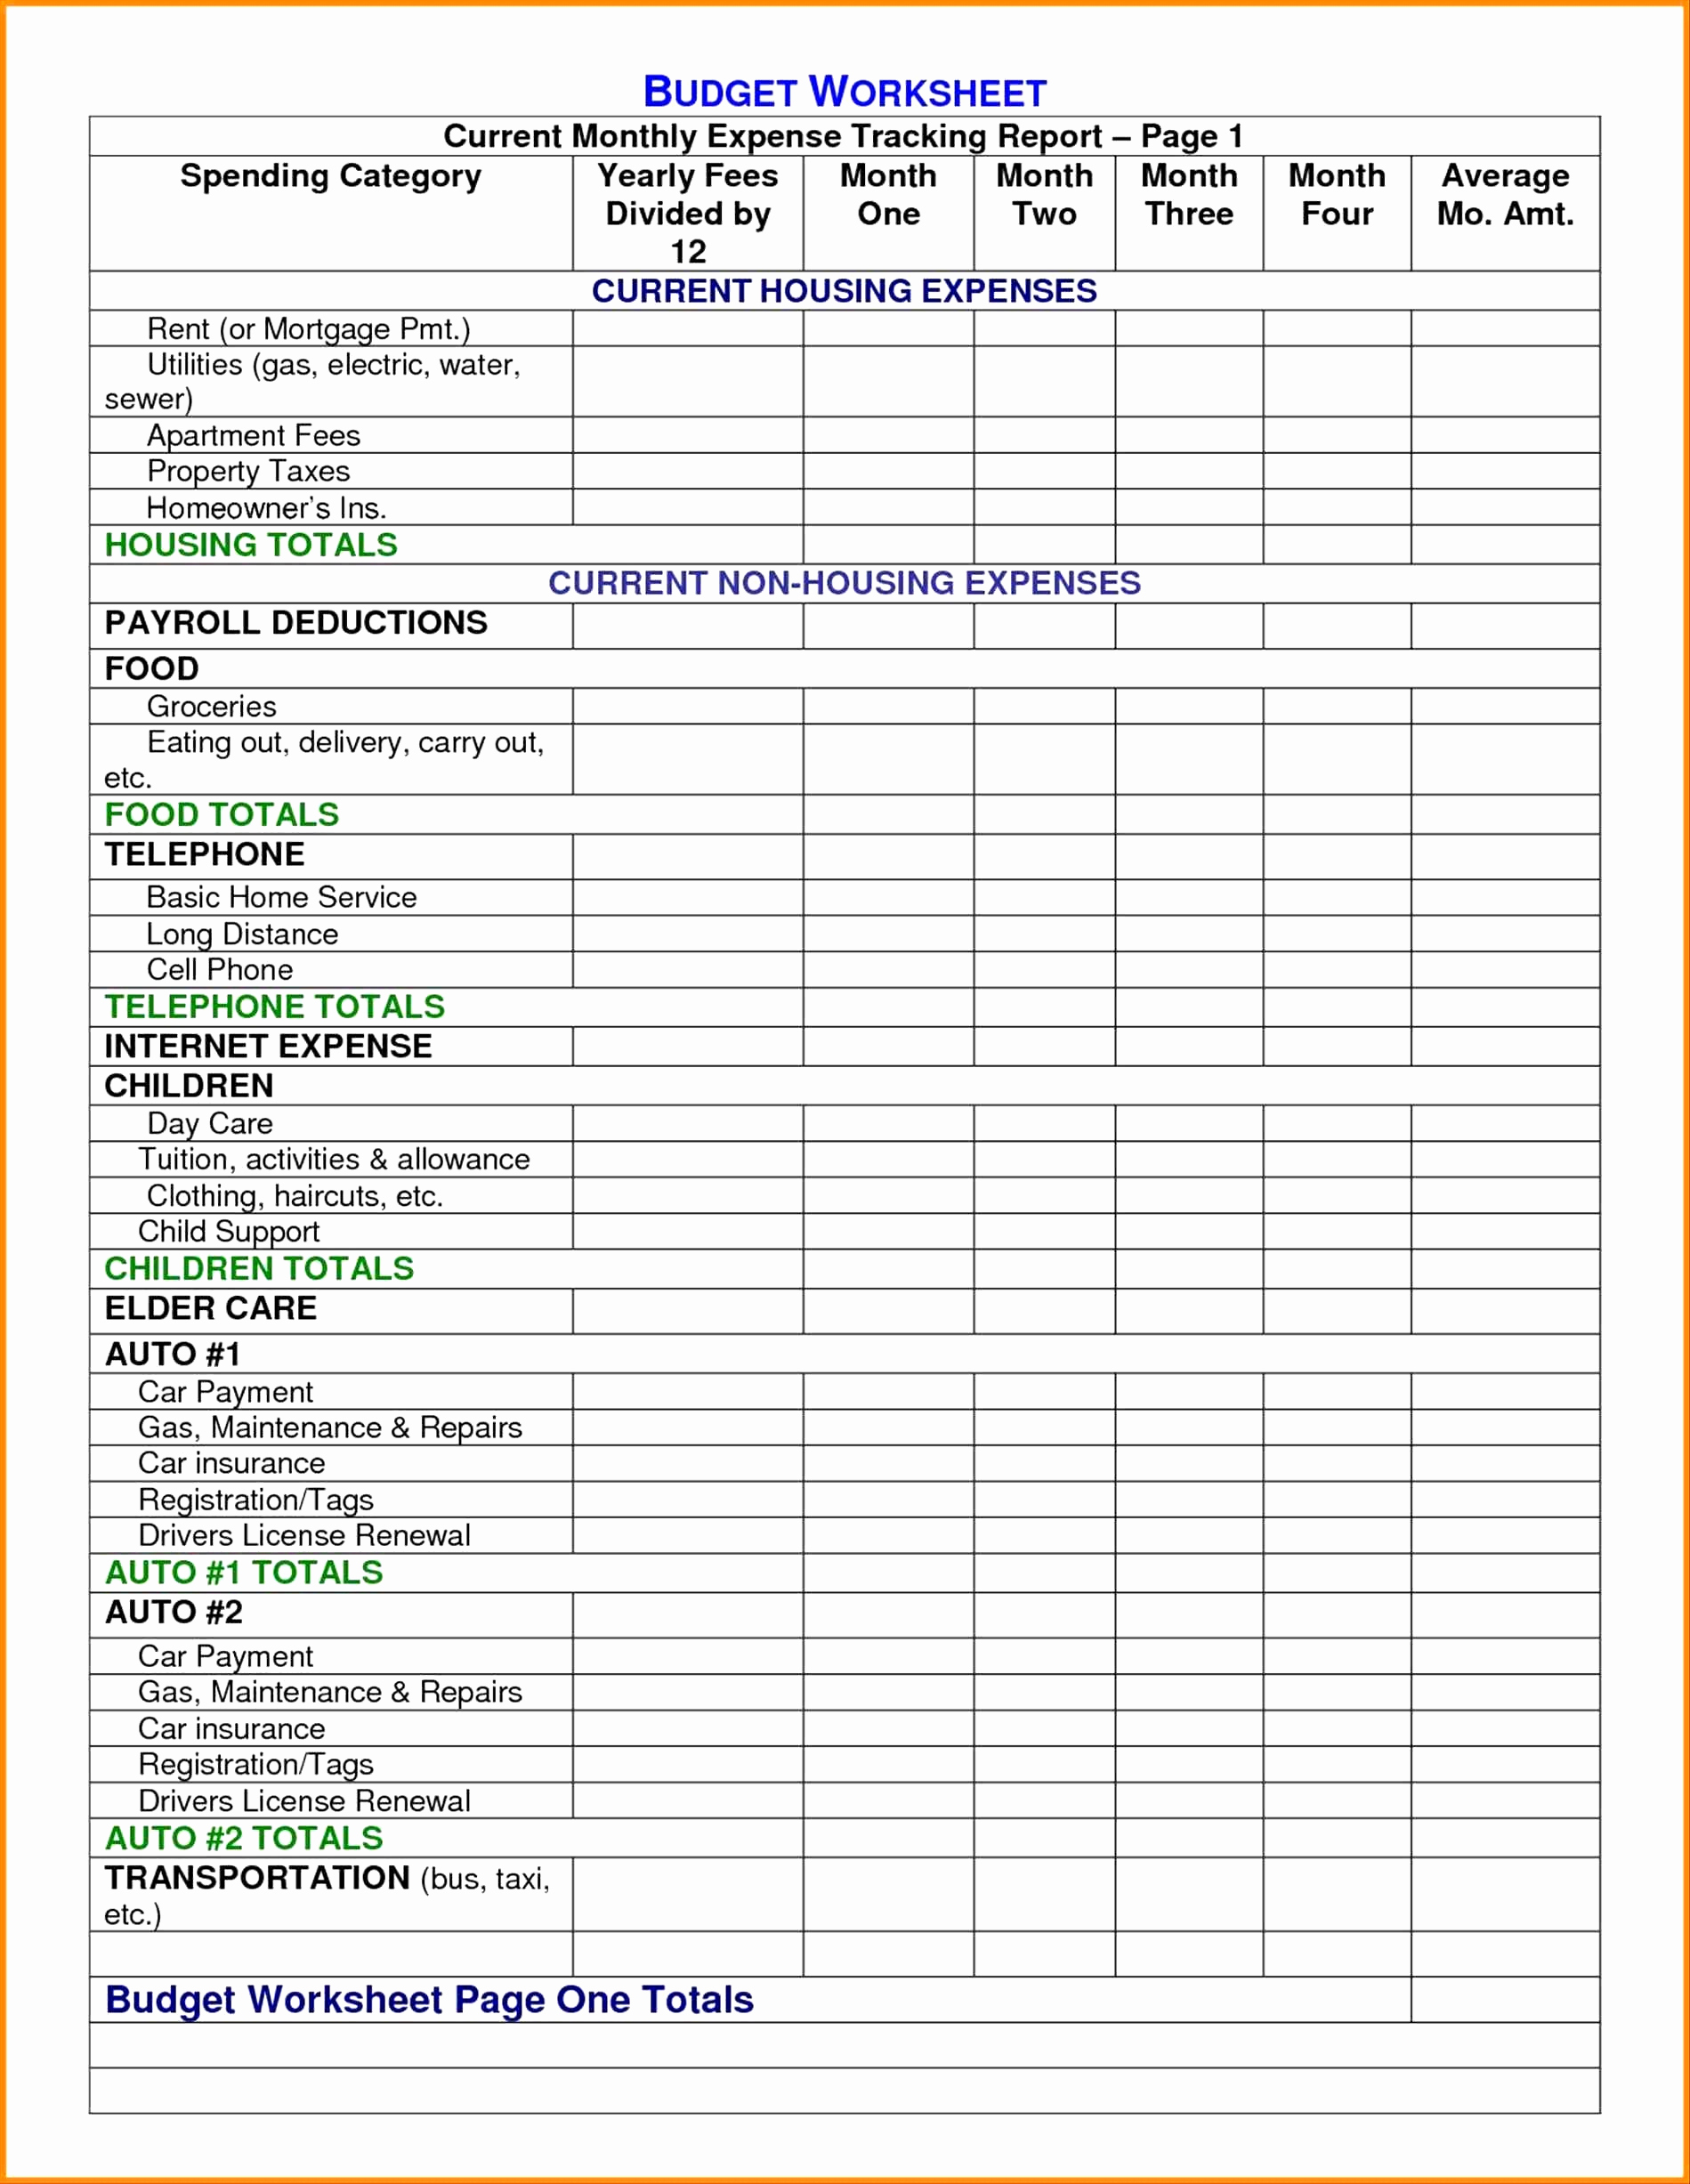 Probate Accounting Spreadsheet Inside 50 Beautiful Probate Accounting Spreadsheet  Documents Ideas